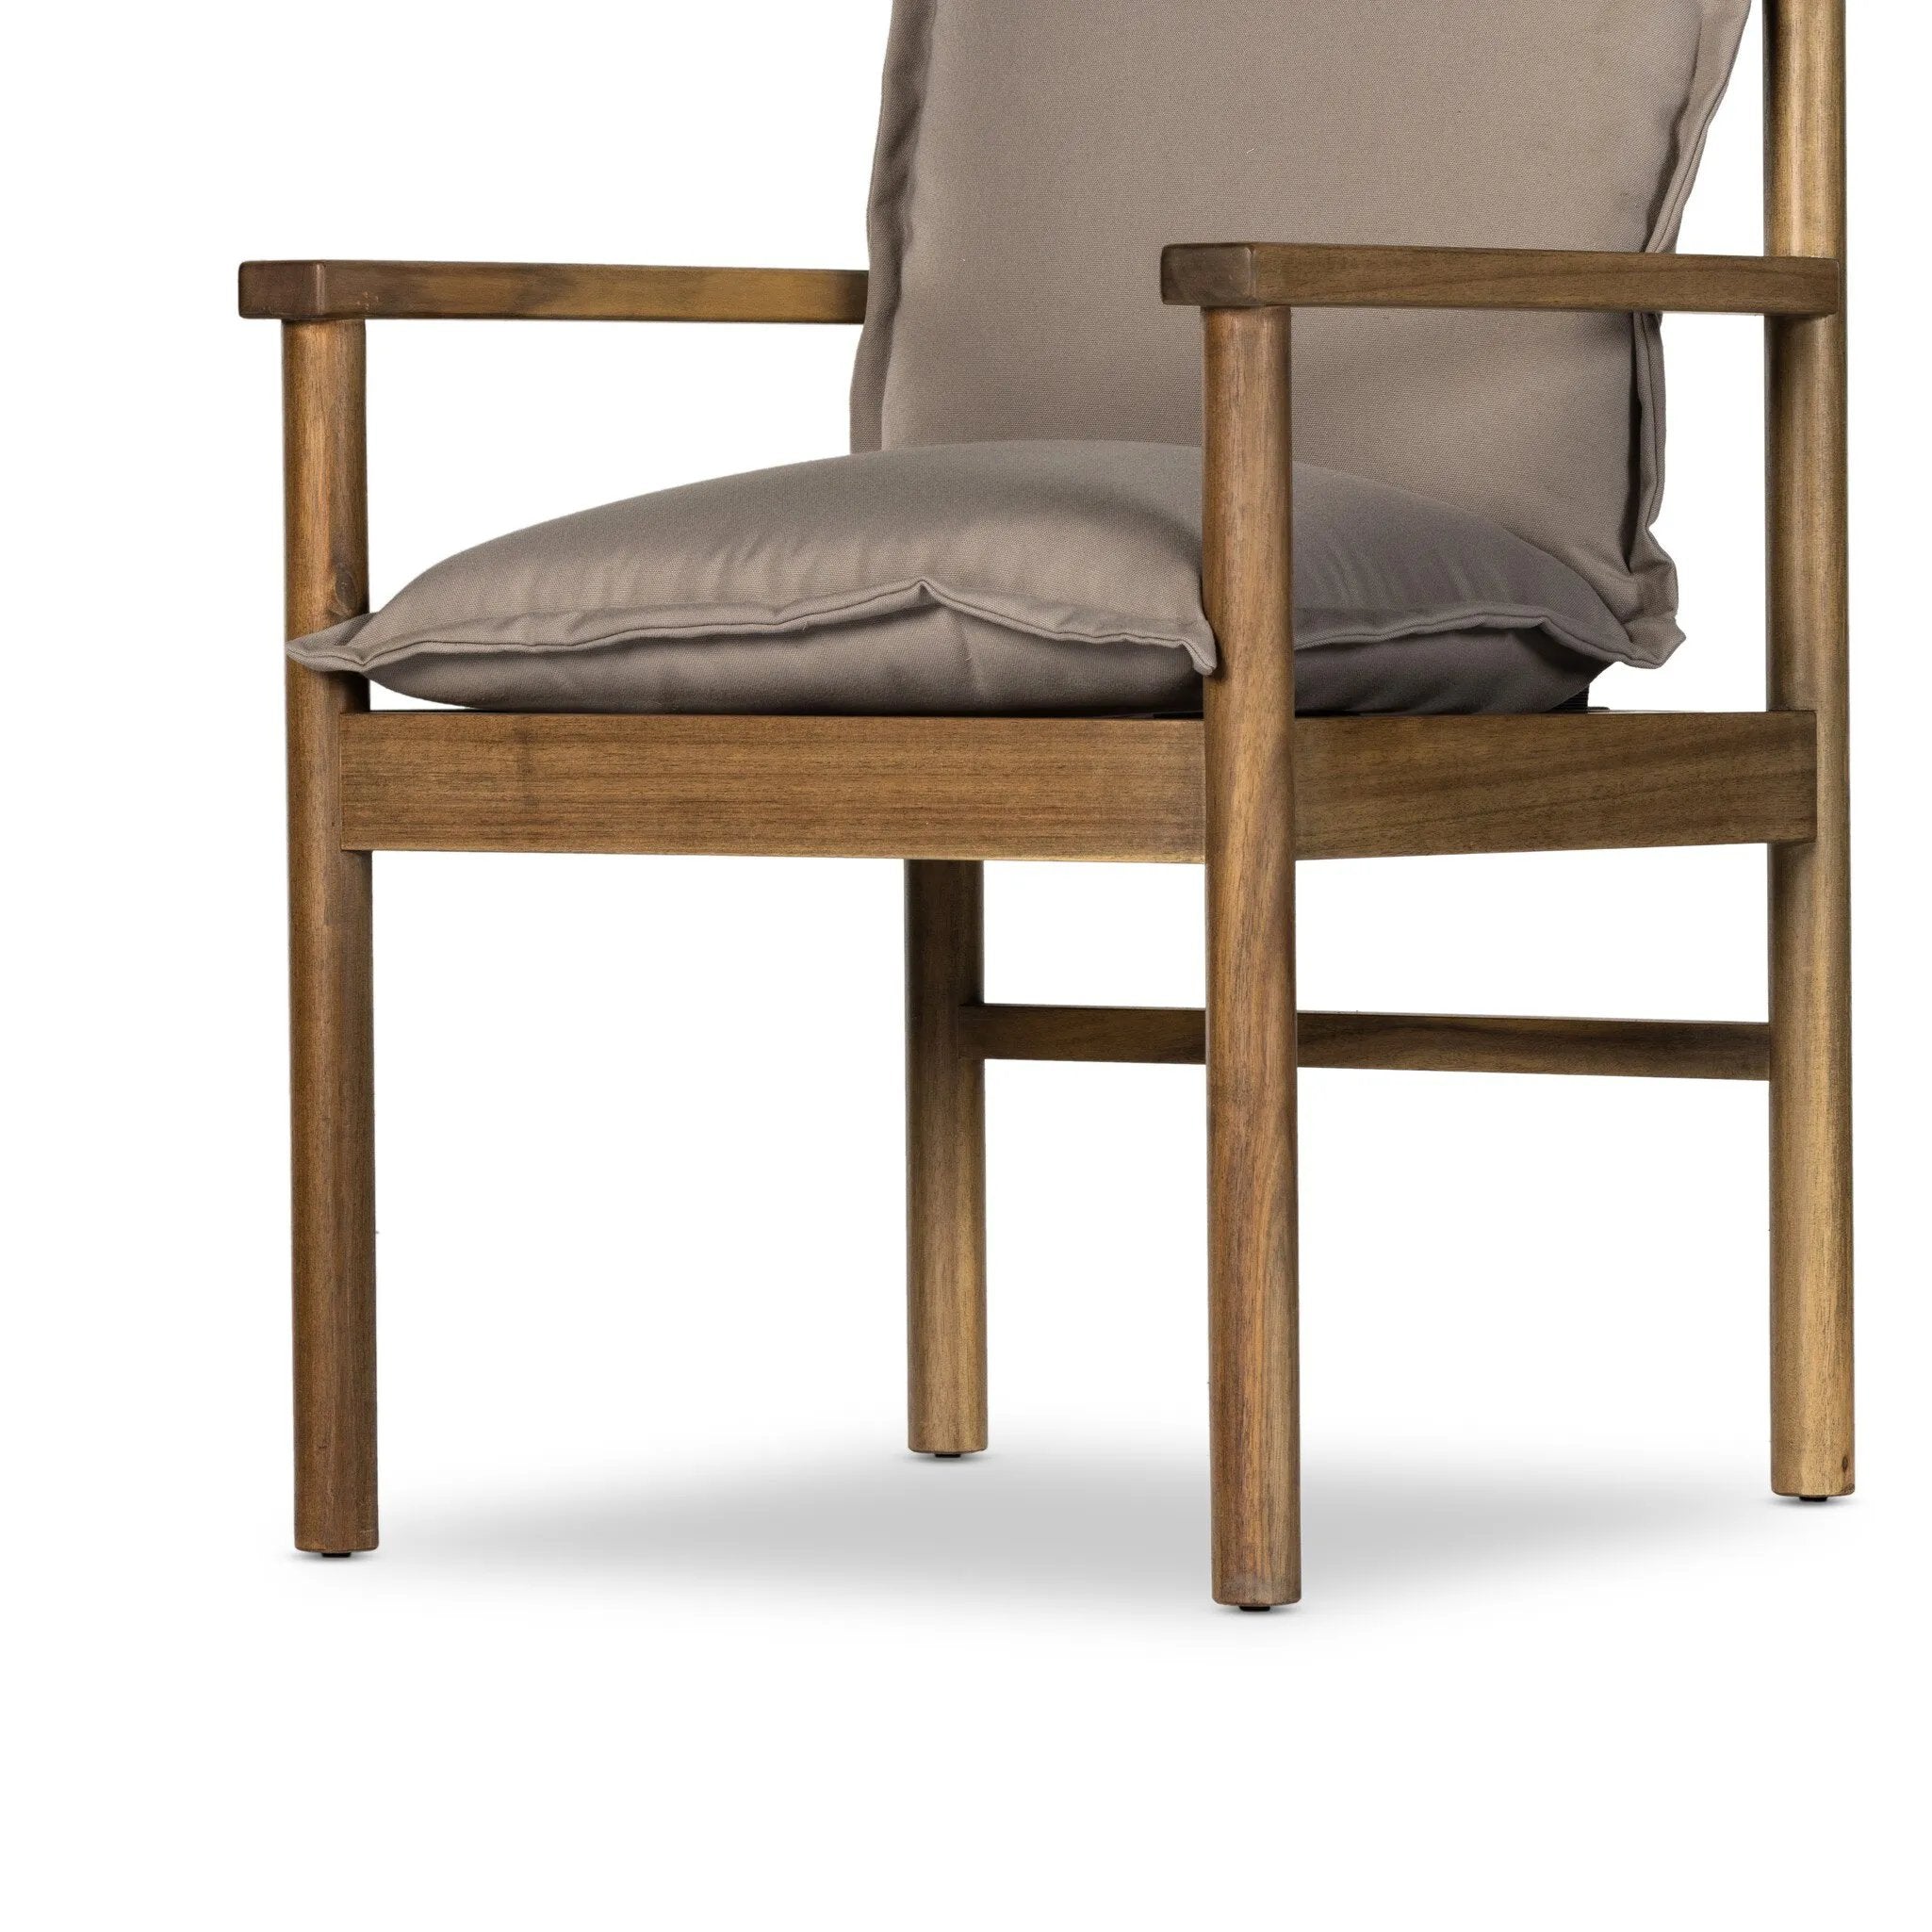 Mixed materials form this monochromatic, transitional silhouette. FSCÂ®-certified acacia and flange-detailed cushioning are accented by straps across the back for visual interest. Paddle arms contrast with a dowel leg. Cover or store indoors during inclement weather and when not in use.Collection: Oakdal Amethyst Home provides interior design, new home construction design consulting, vintage area rugs, and lighting in the Austin metro area.